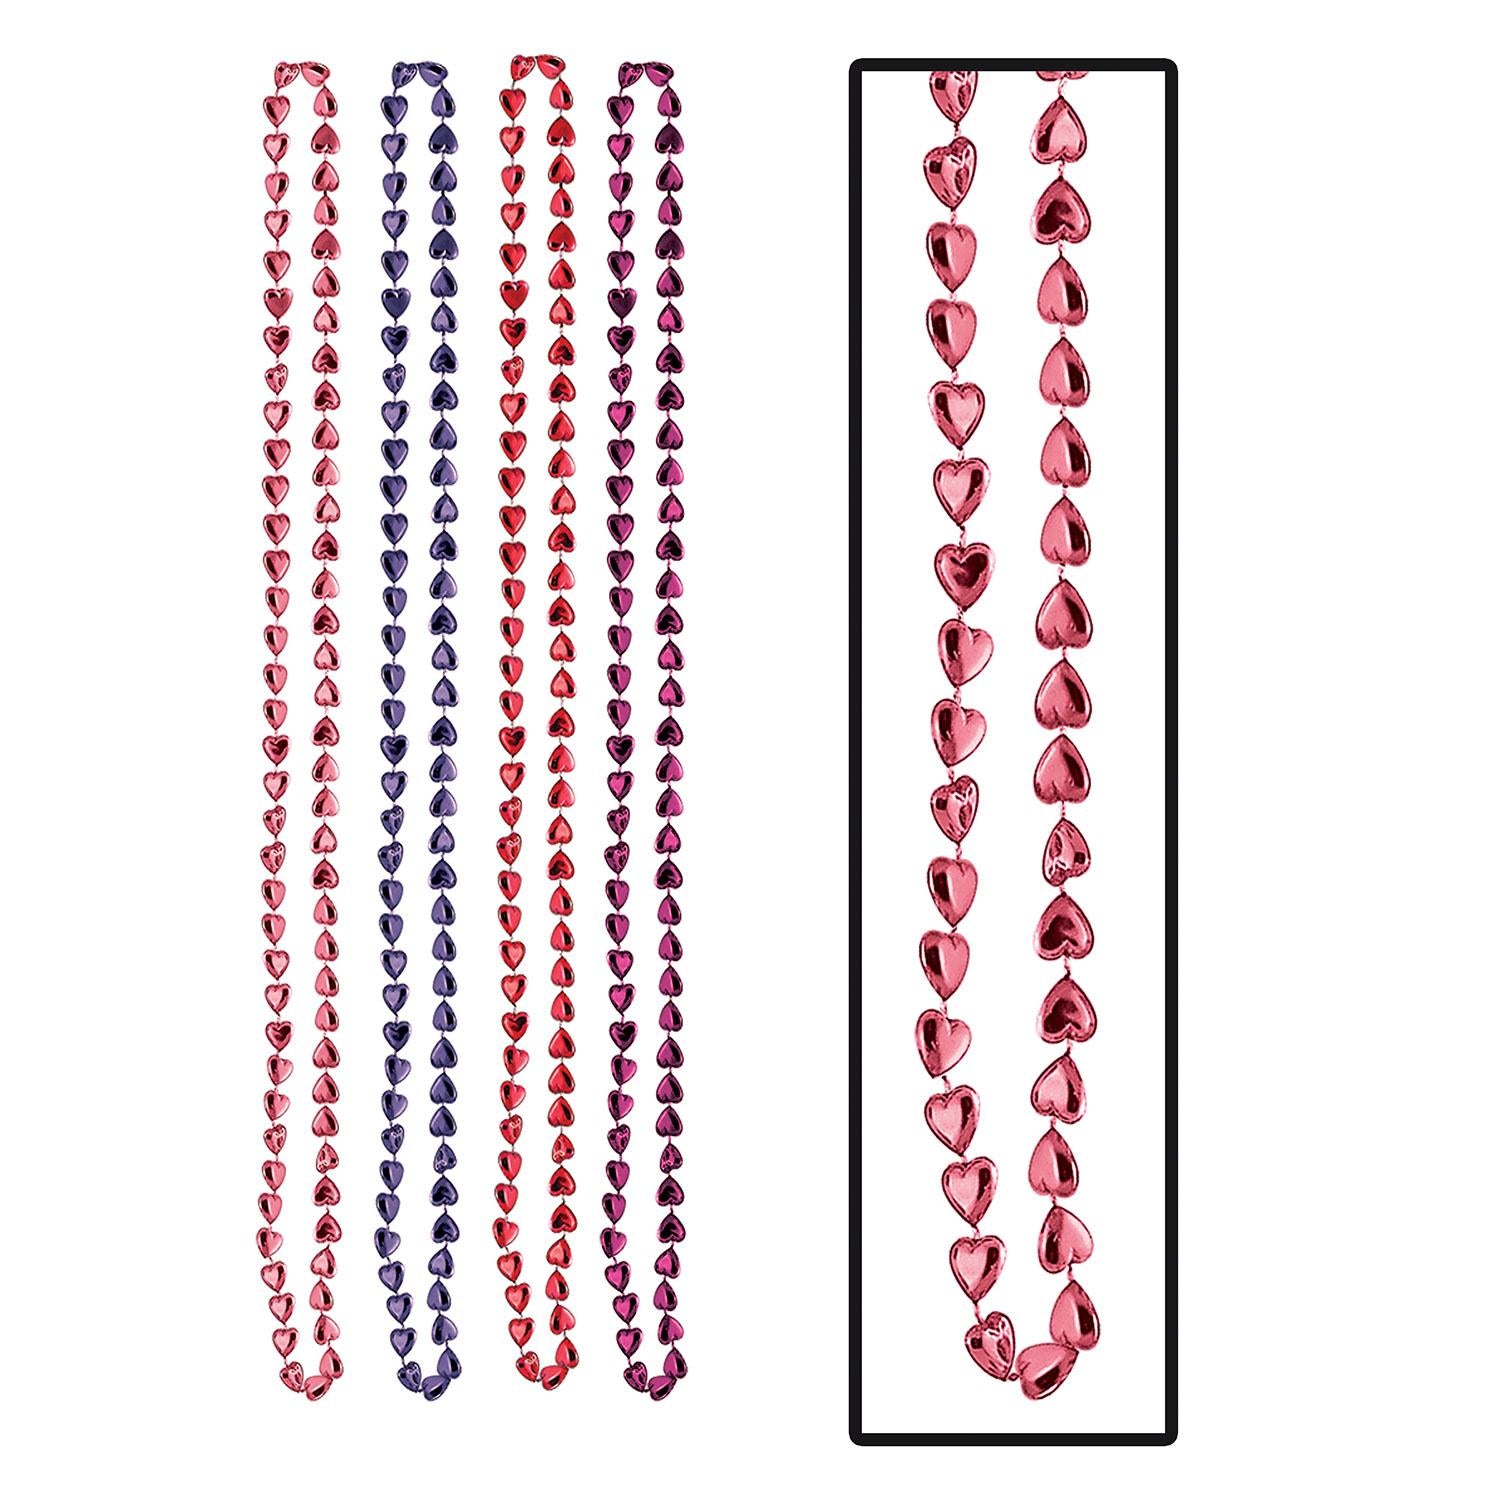 Beistle Valentine's Day Candy Heart Bead Necklaces (4/Pkg)